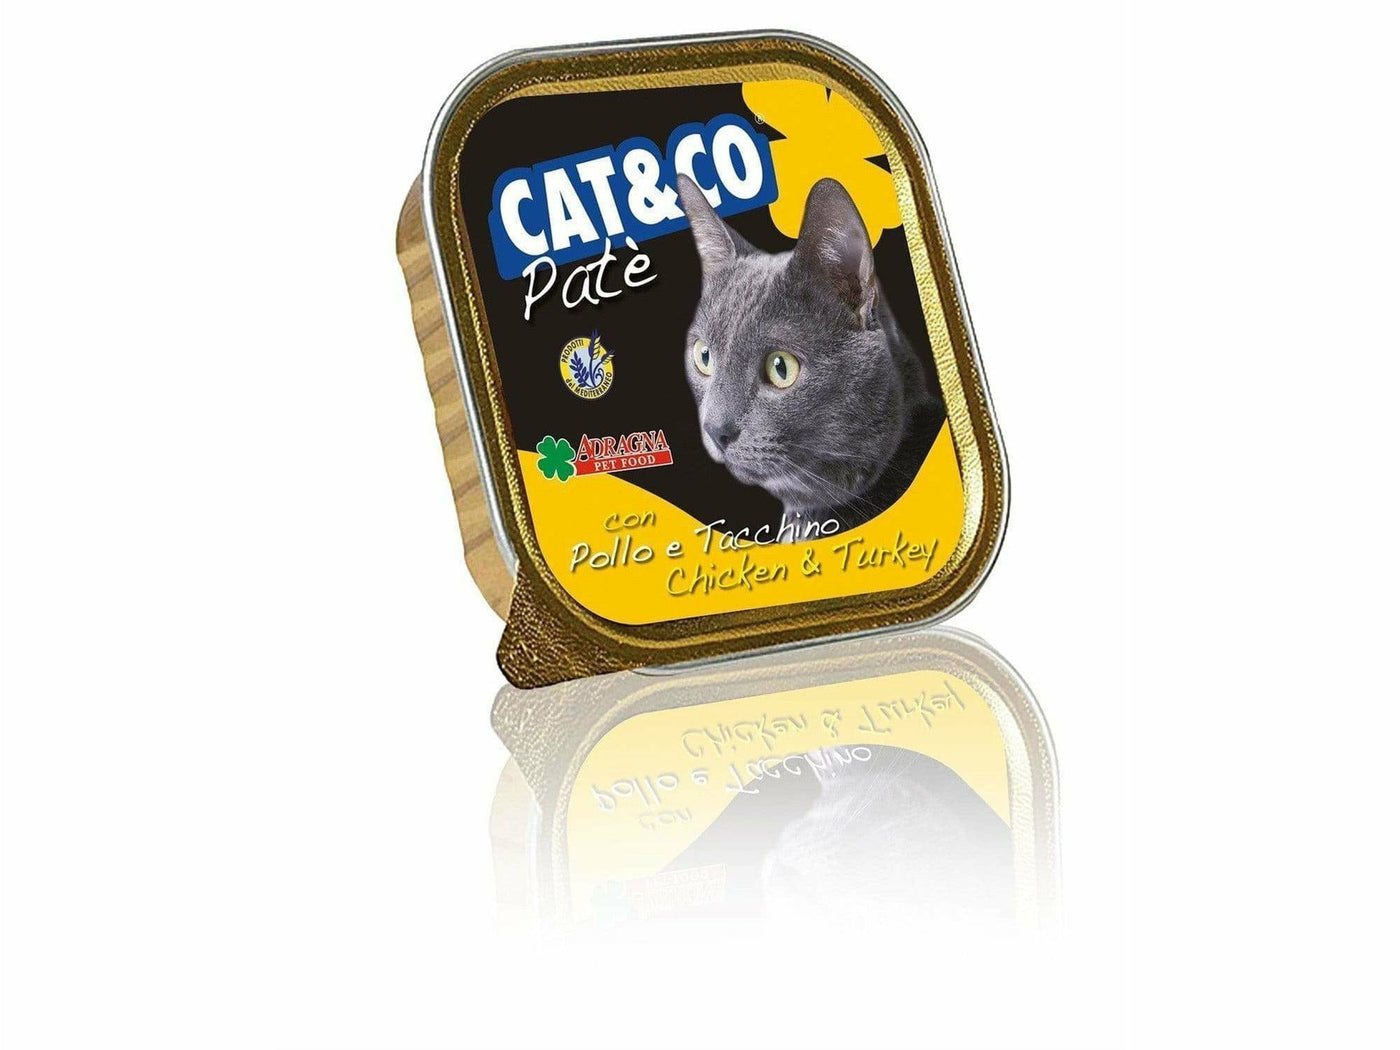 Cat & Co PATE Chicken and Turkey 100g